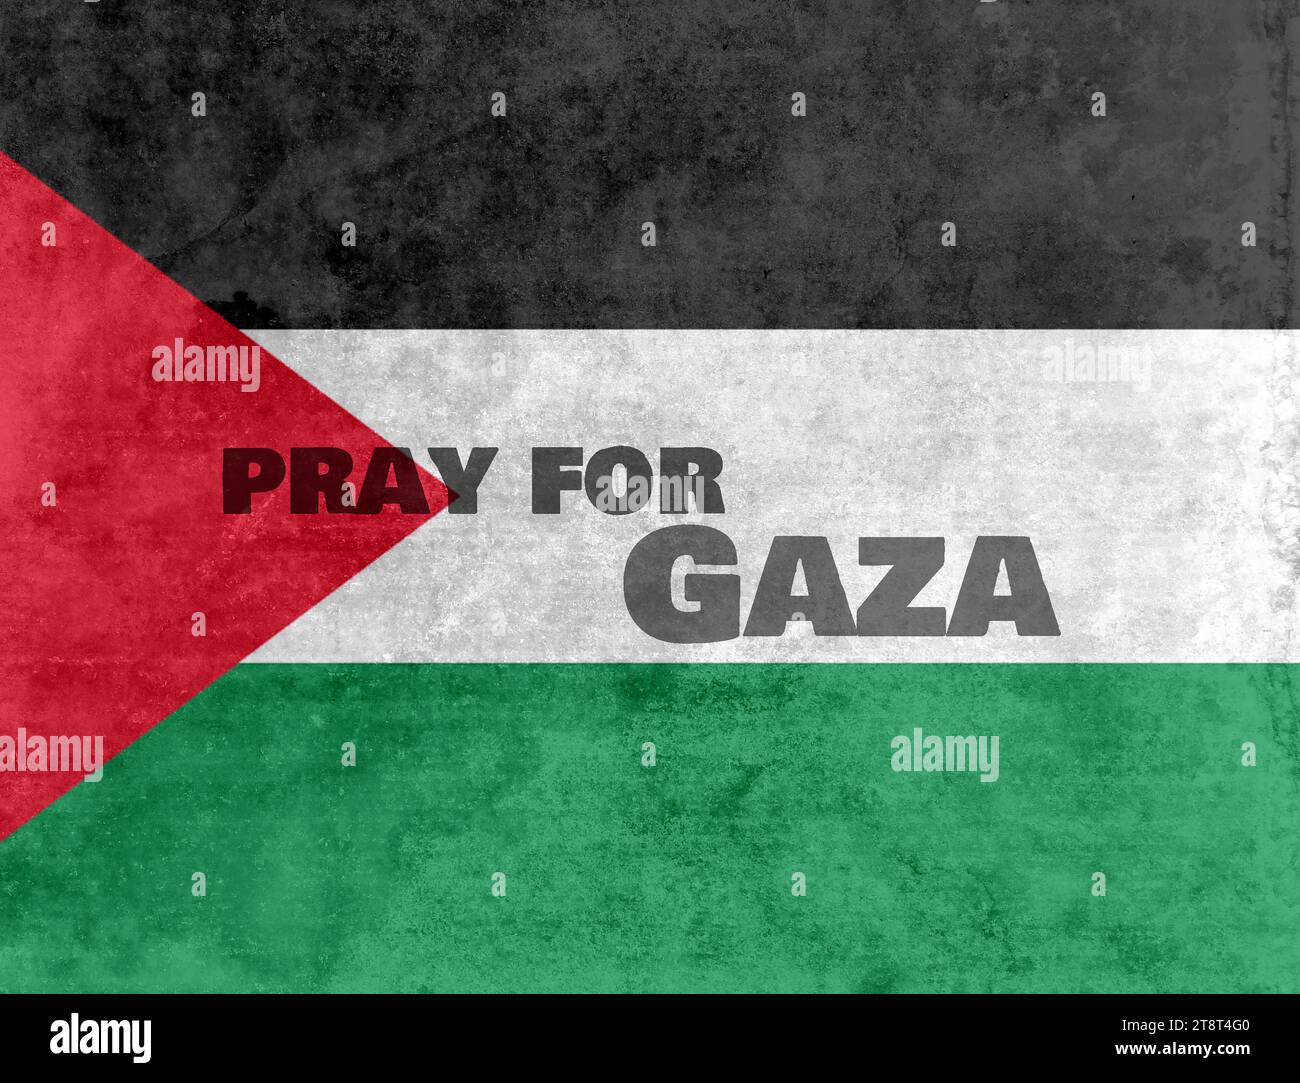 Damaged grunge flag of Palestine, Palestinian Territories with the text Pray for Gaza Stock Photo